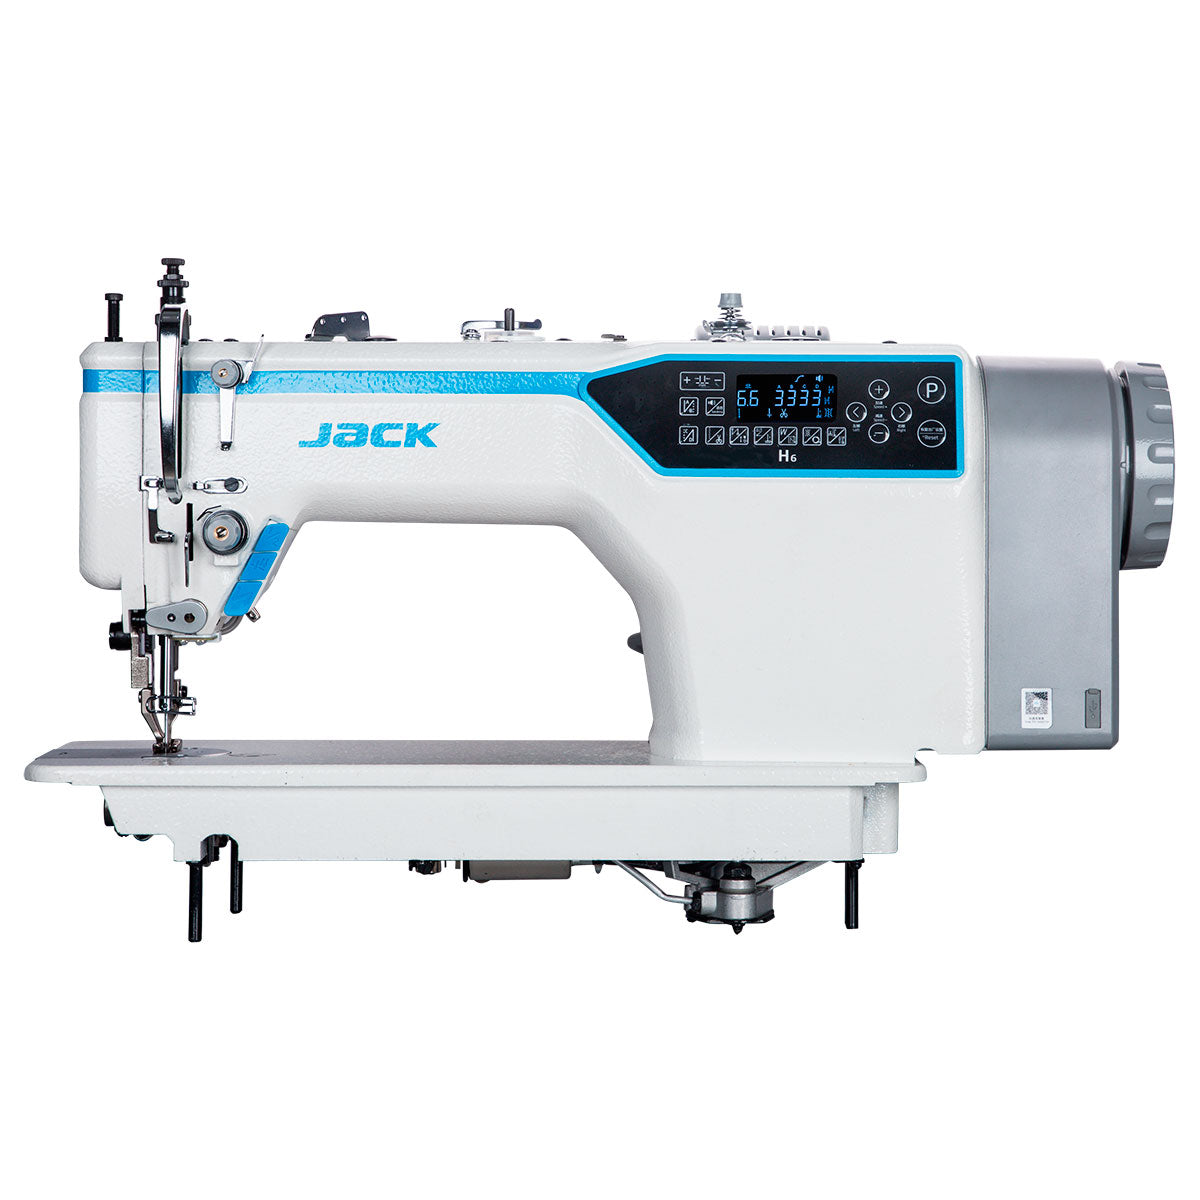 JACK H6-CZ-4 Single Needle Direct Drive Fully Automatic Top and Bottom Feed Walking Foot Sewing Machine Assembled with Table and Stand Included